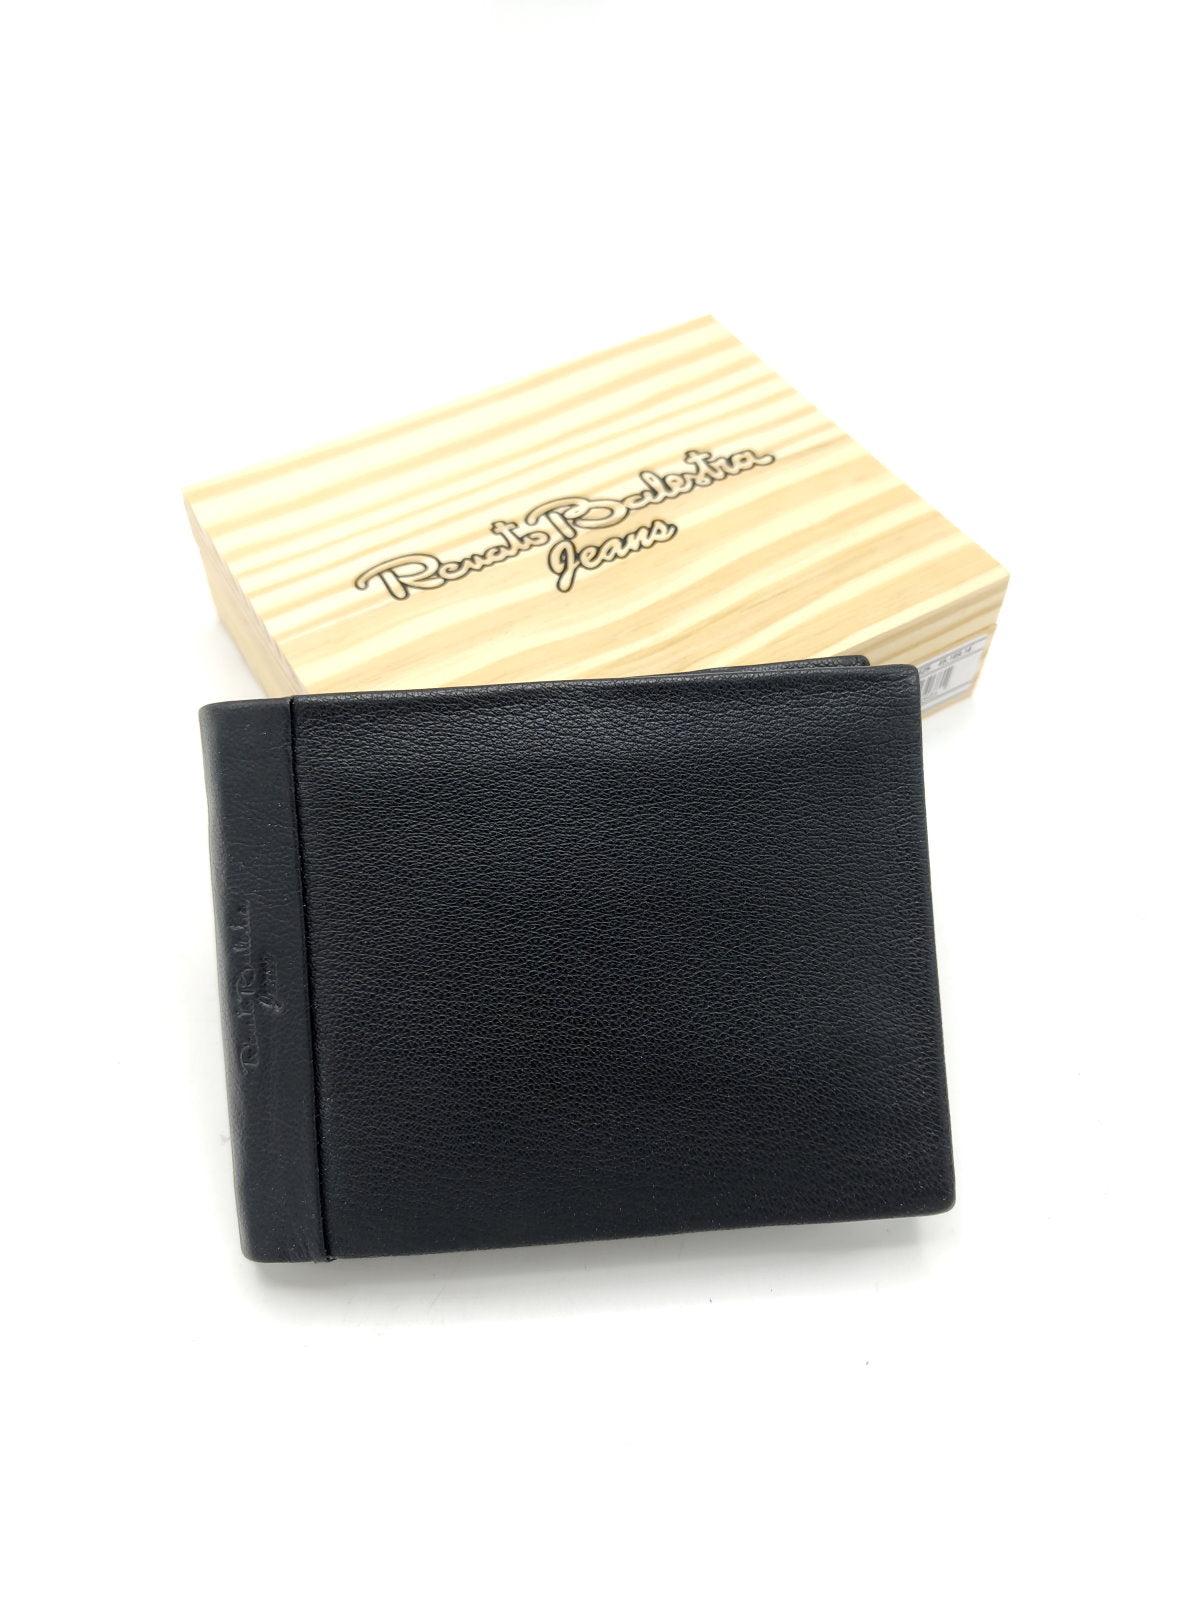 Genuine leather wallet for Men, Brand Renato Balestra Jeans, with wooden box, art. PDK162-68.425